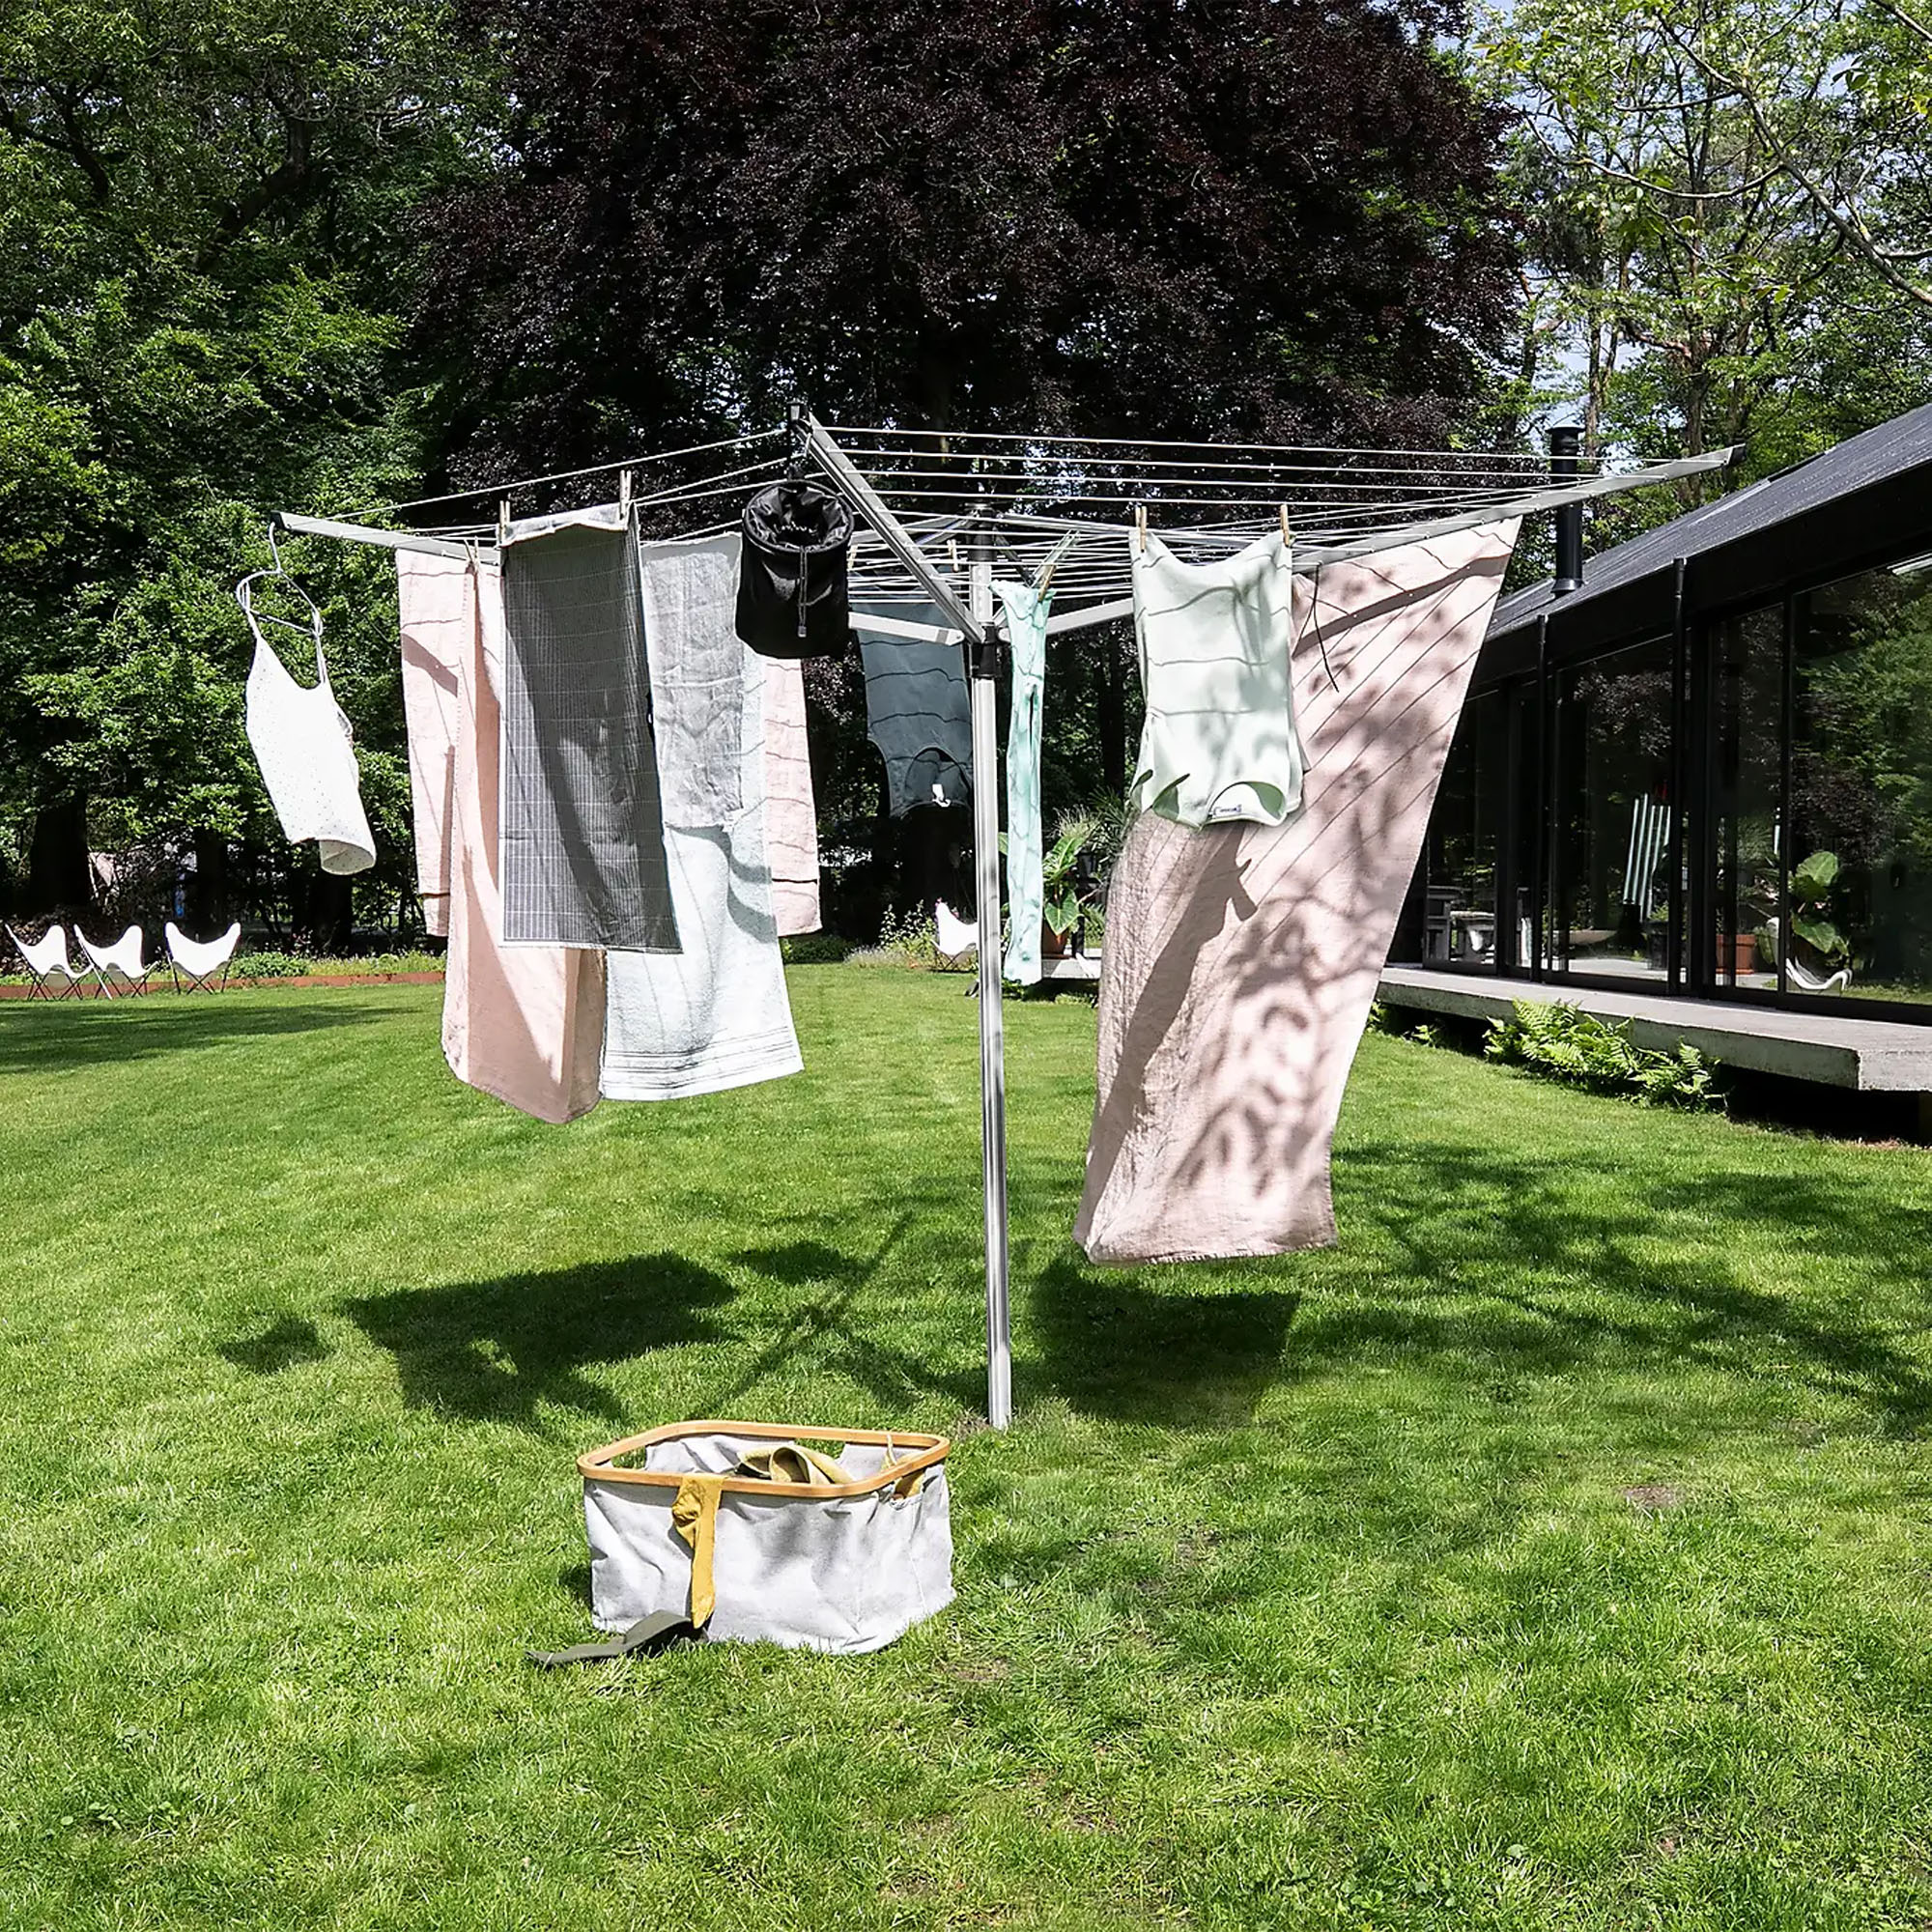 The Brabantia Lift-O-Matic rotary airer with washing hanging on it positioned in a garden lawn